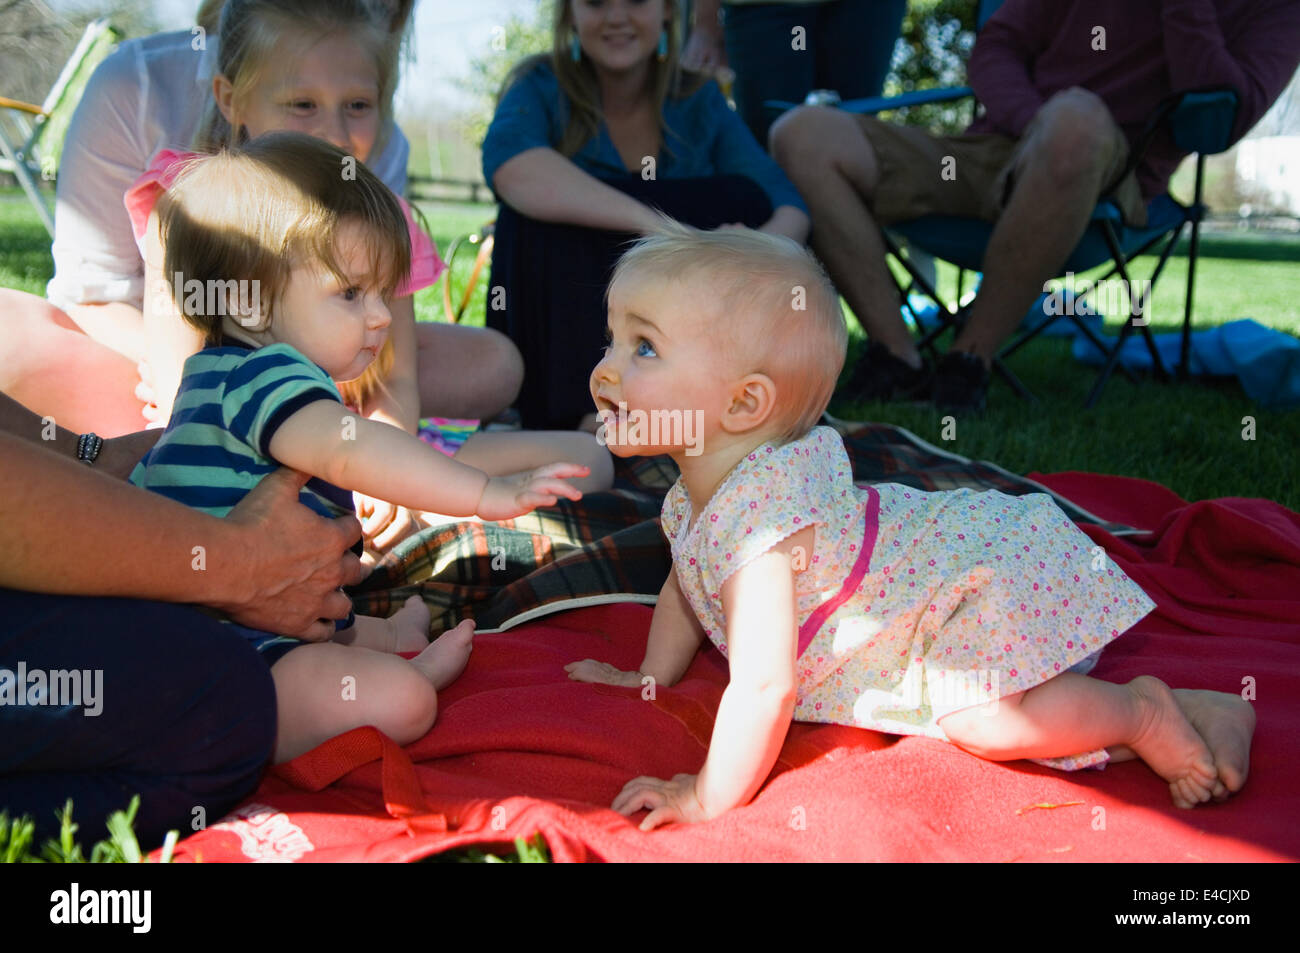 Baby Boy and Baby Girl Meeting for the First Time at a Family Reunion Stock Photo